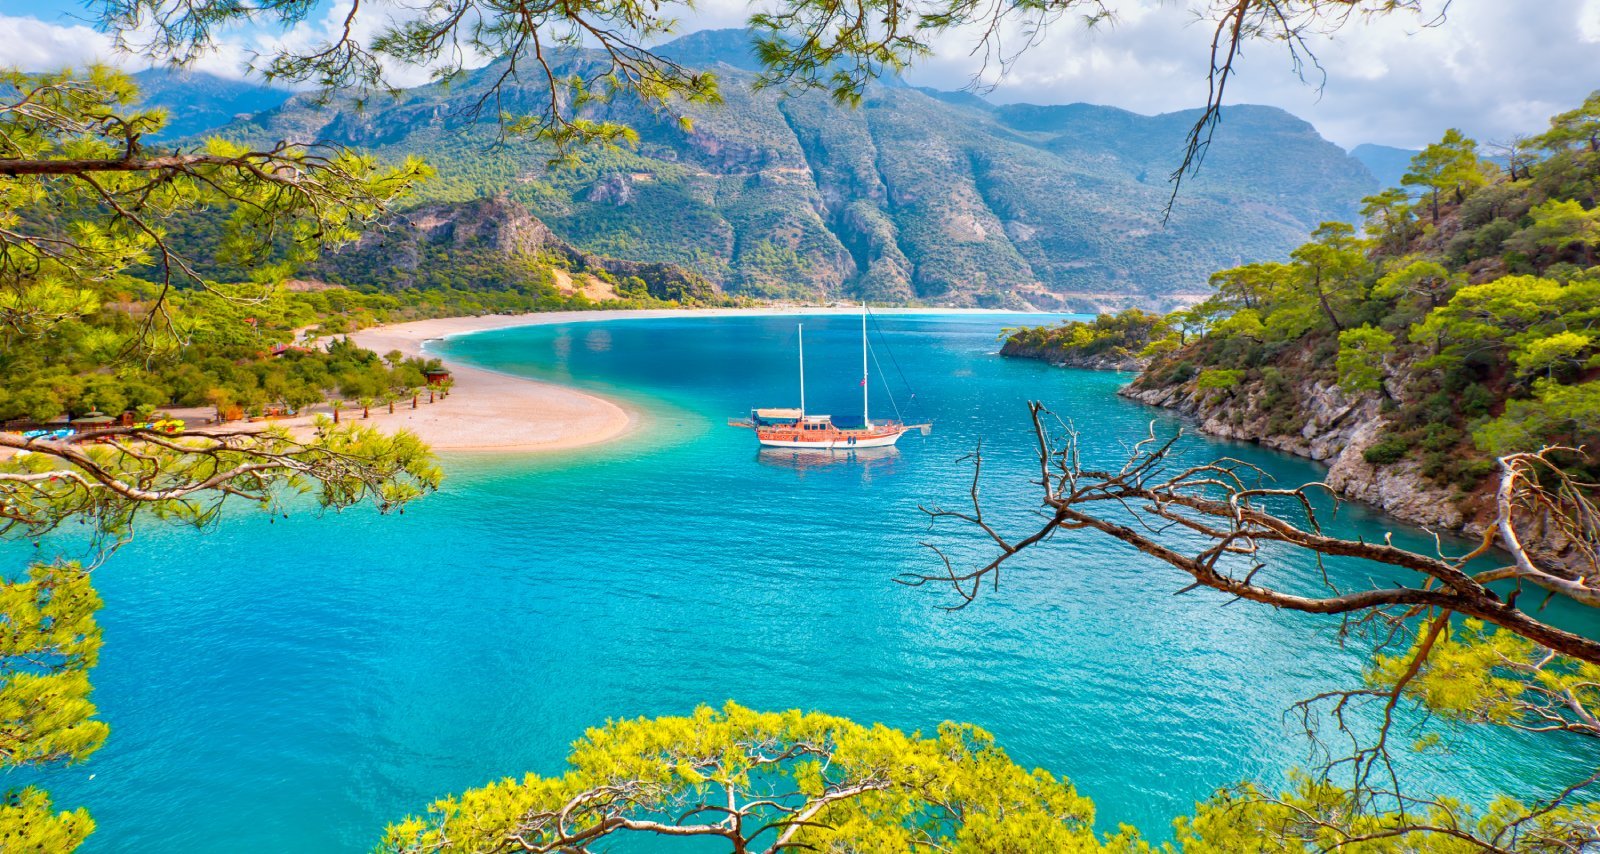 <p class="wp-caption-text">Image Credit: Shutterstock / muratart</p>  <p><span>Turkey’s Aegean coastline is a sailor’s dream, known for its rich history, archaeological sites, and picturesque bays. The region, stretching from the Gallipoli Peninsula down to the Marmaris Peninsula, offers a diverse range of sailing experiences. The coastline is dotted with ancient ruins, including the city of Ephesus, and charming towns like Bodrum and Fethiye. The area benefits from predictable winds and many safe anchorages, making it ideal for novice sailors and experienced mariners.</span></p>